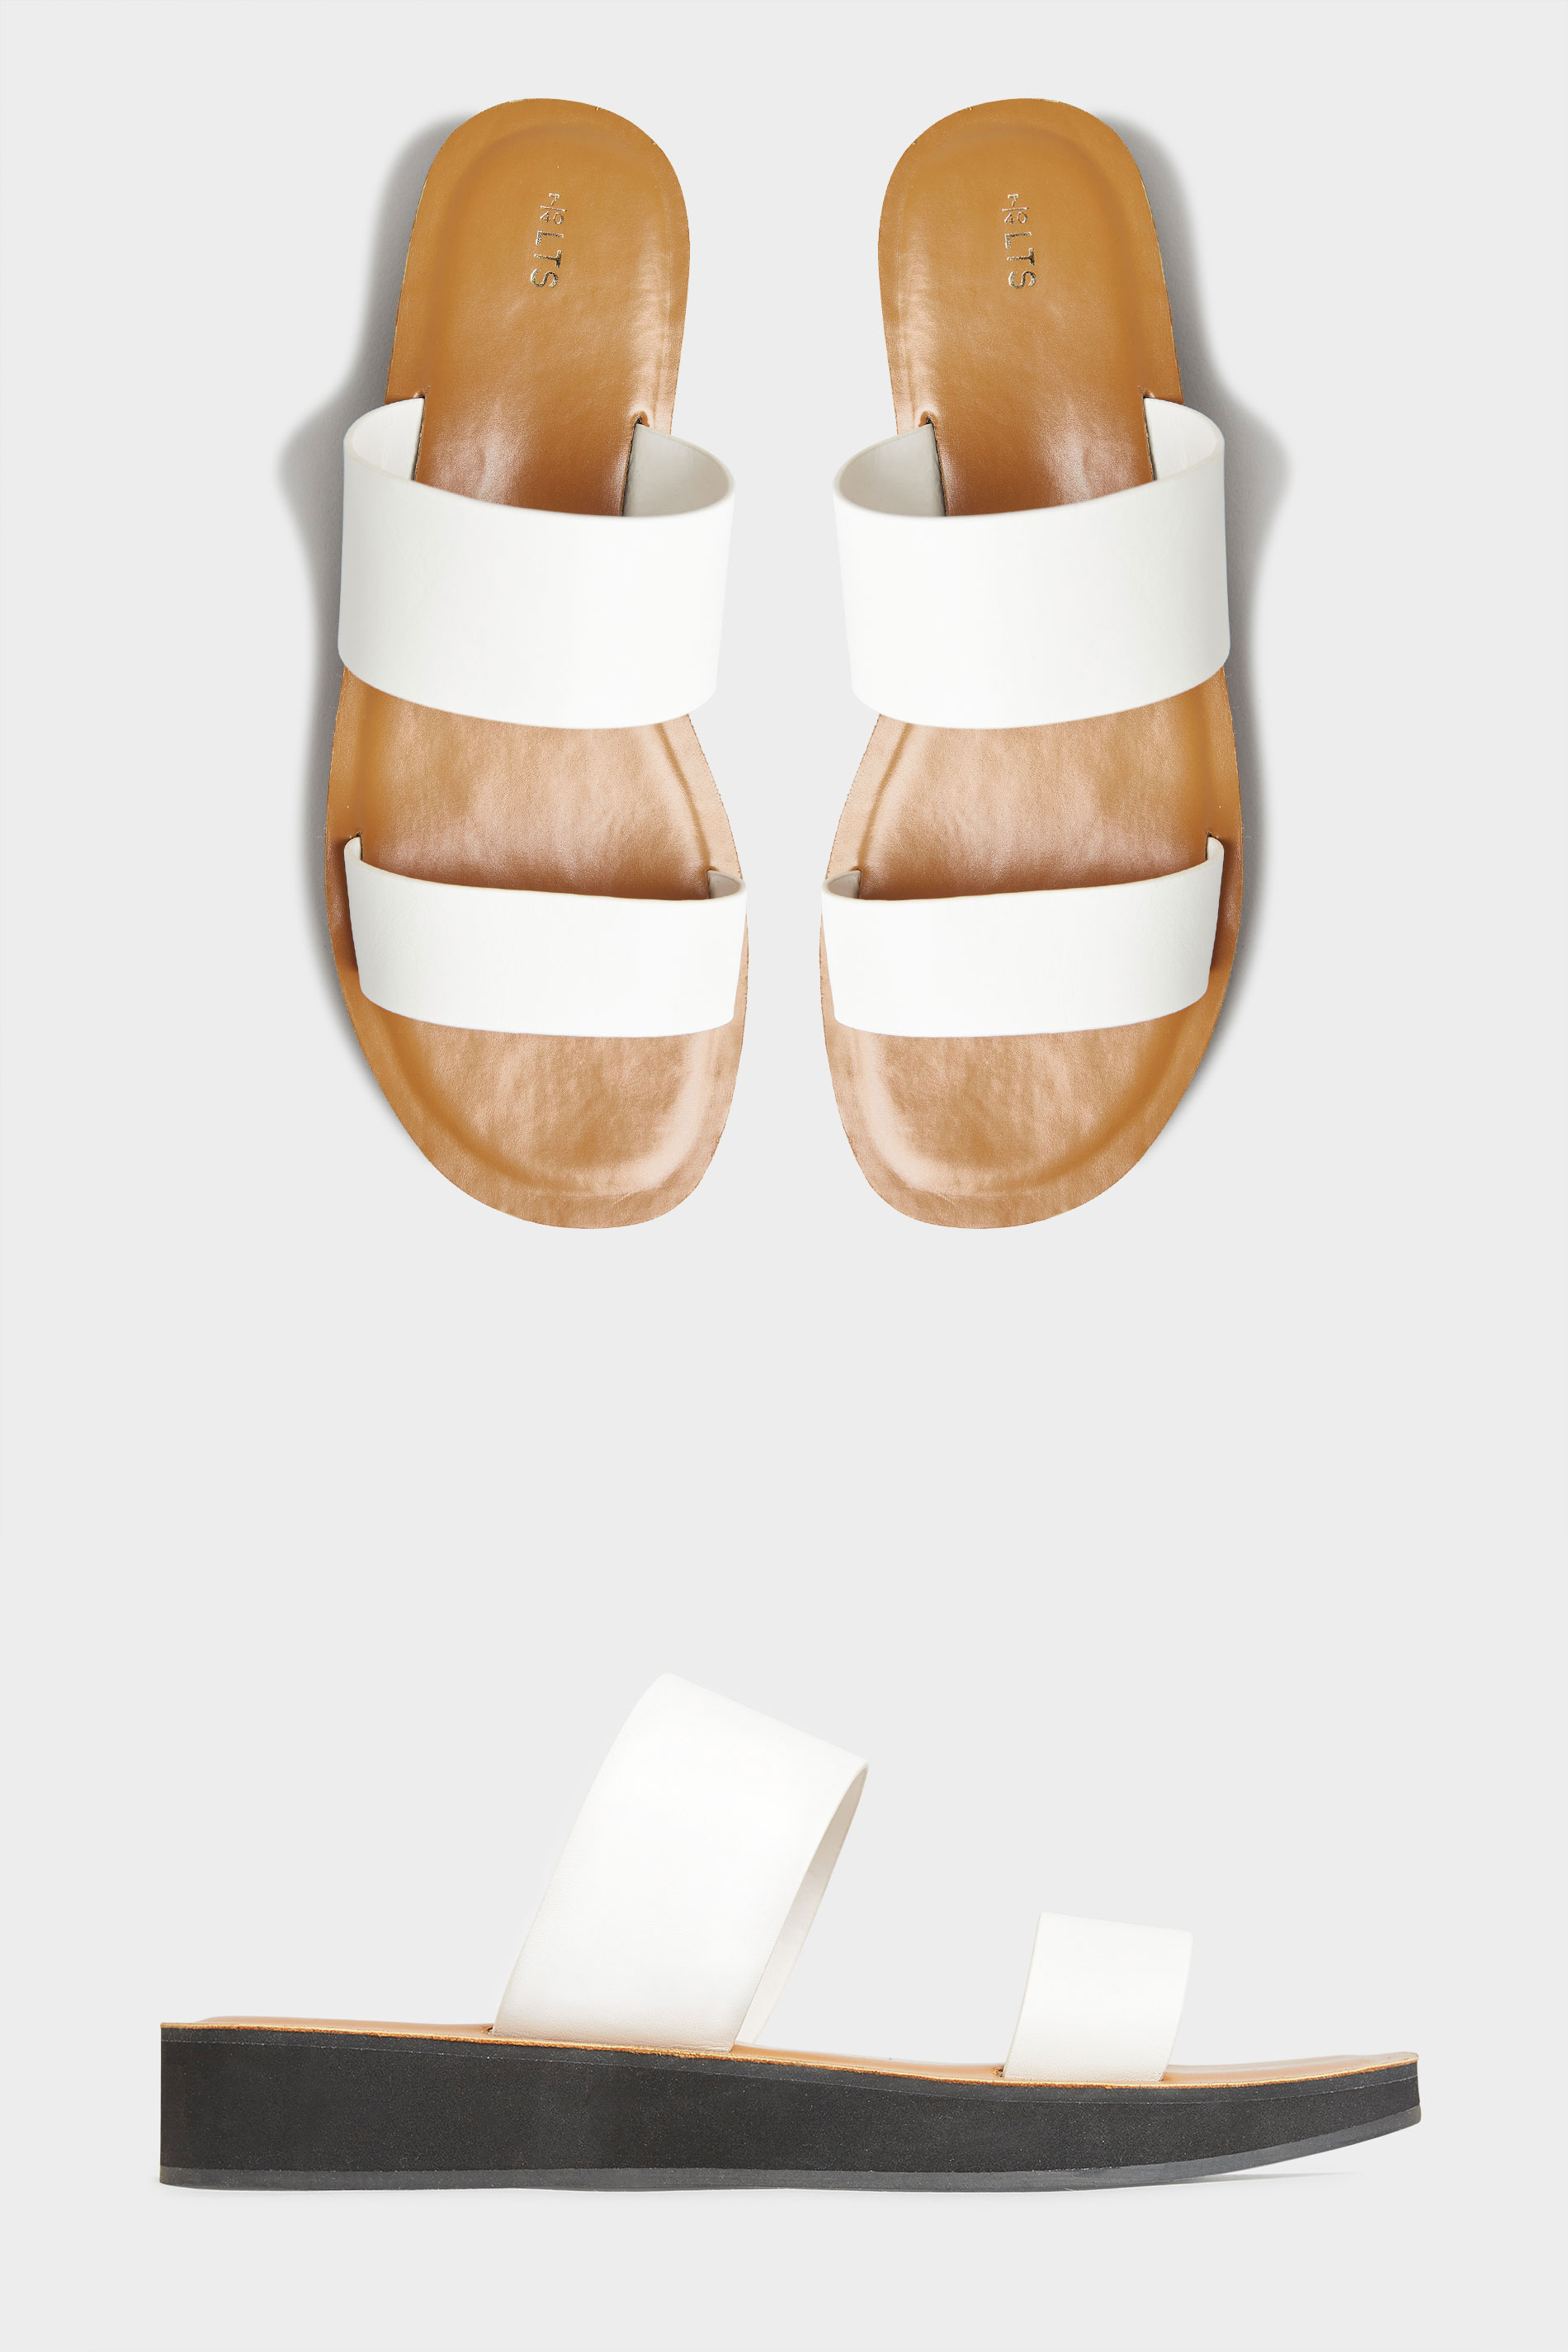 Grande taille  Sandals Grande taille  Flat Sandals | LTS White Two Strap Flat Sandals In Standard D Fit - XM17085